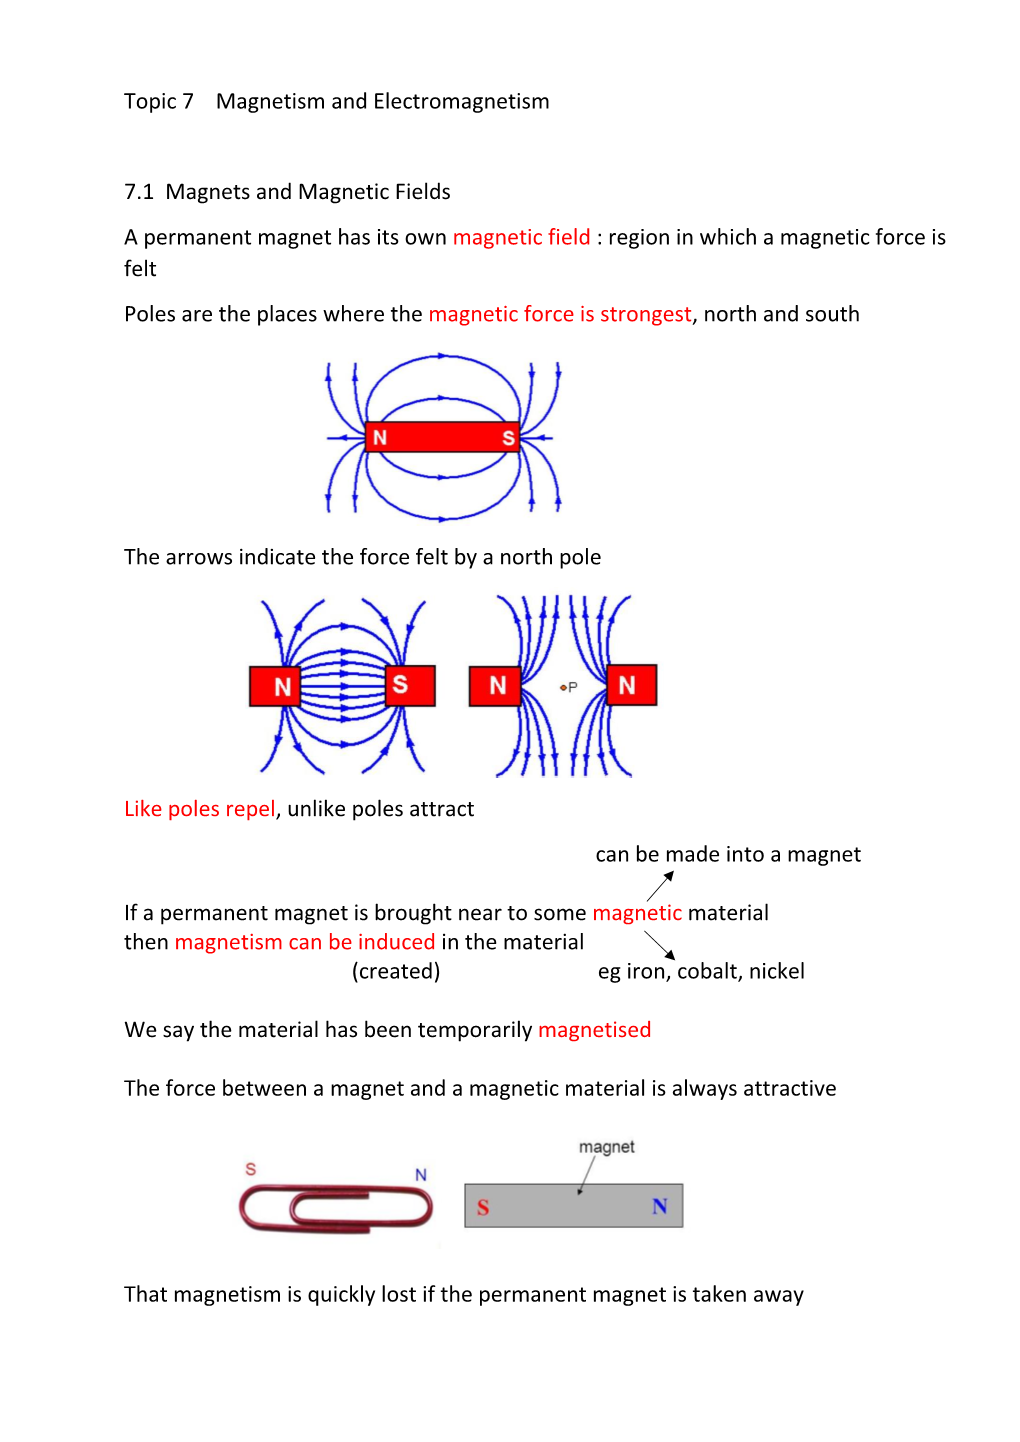 Topic 7 Magnetism and Electromagnetism